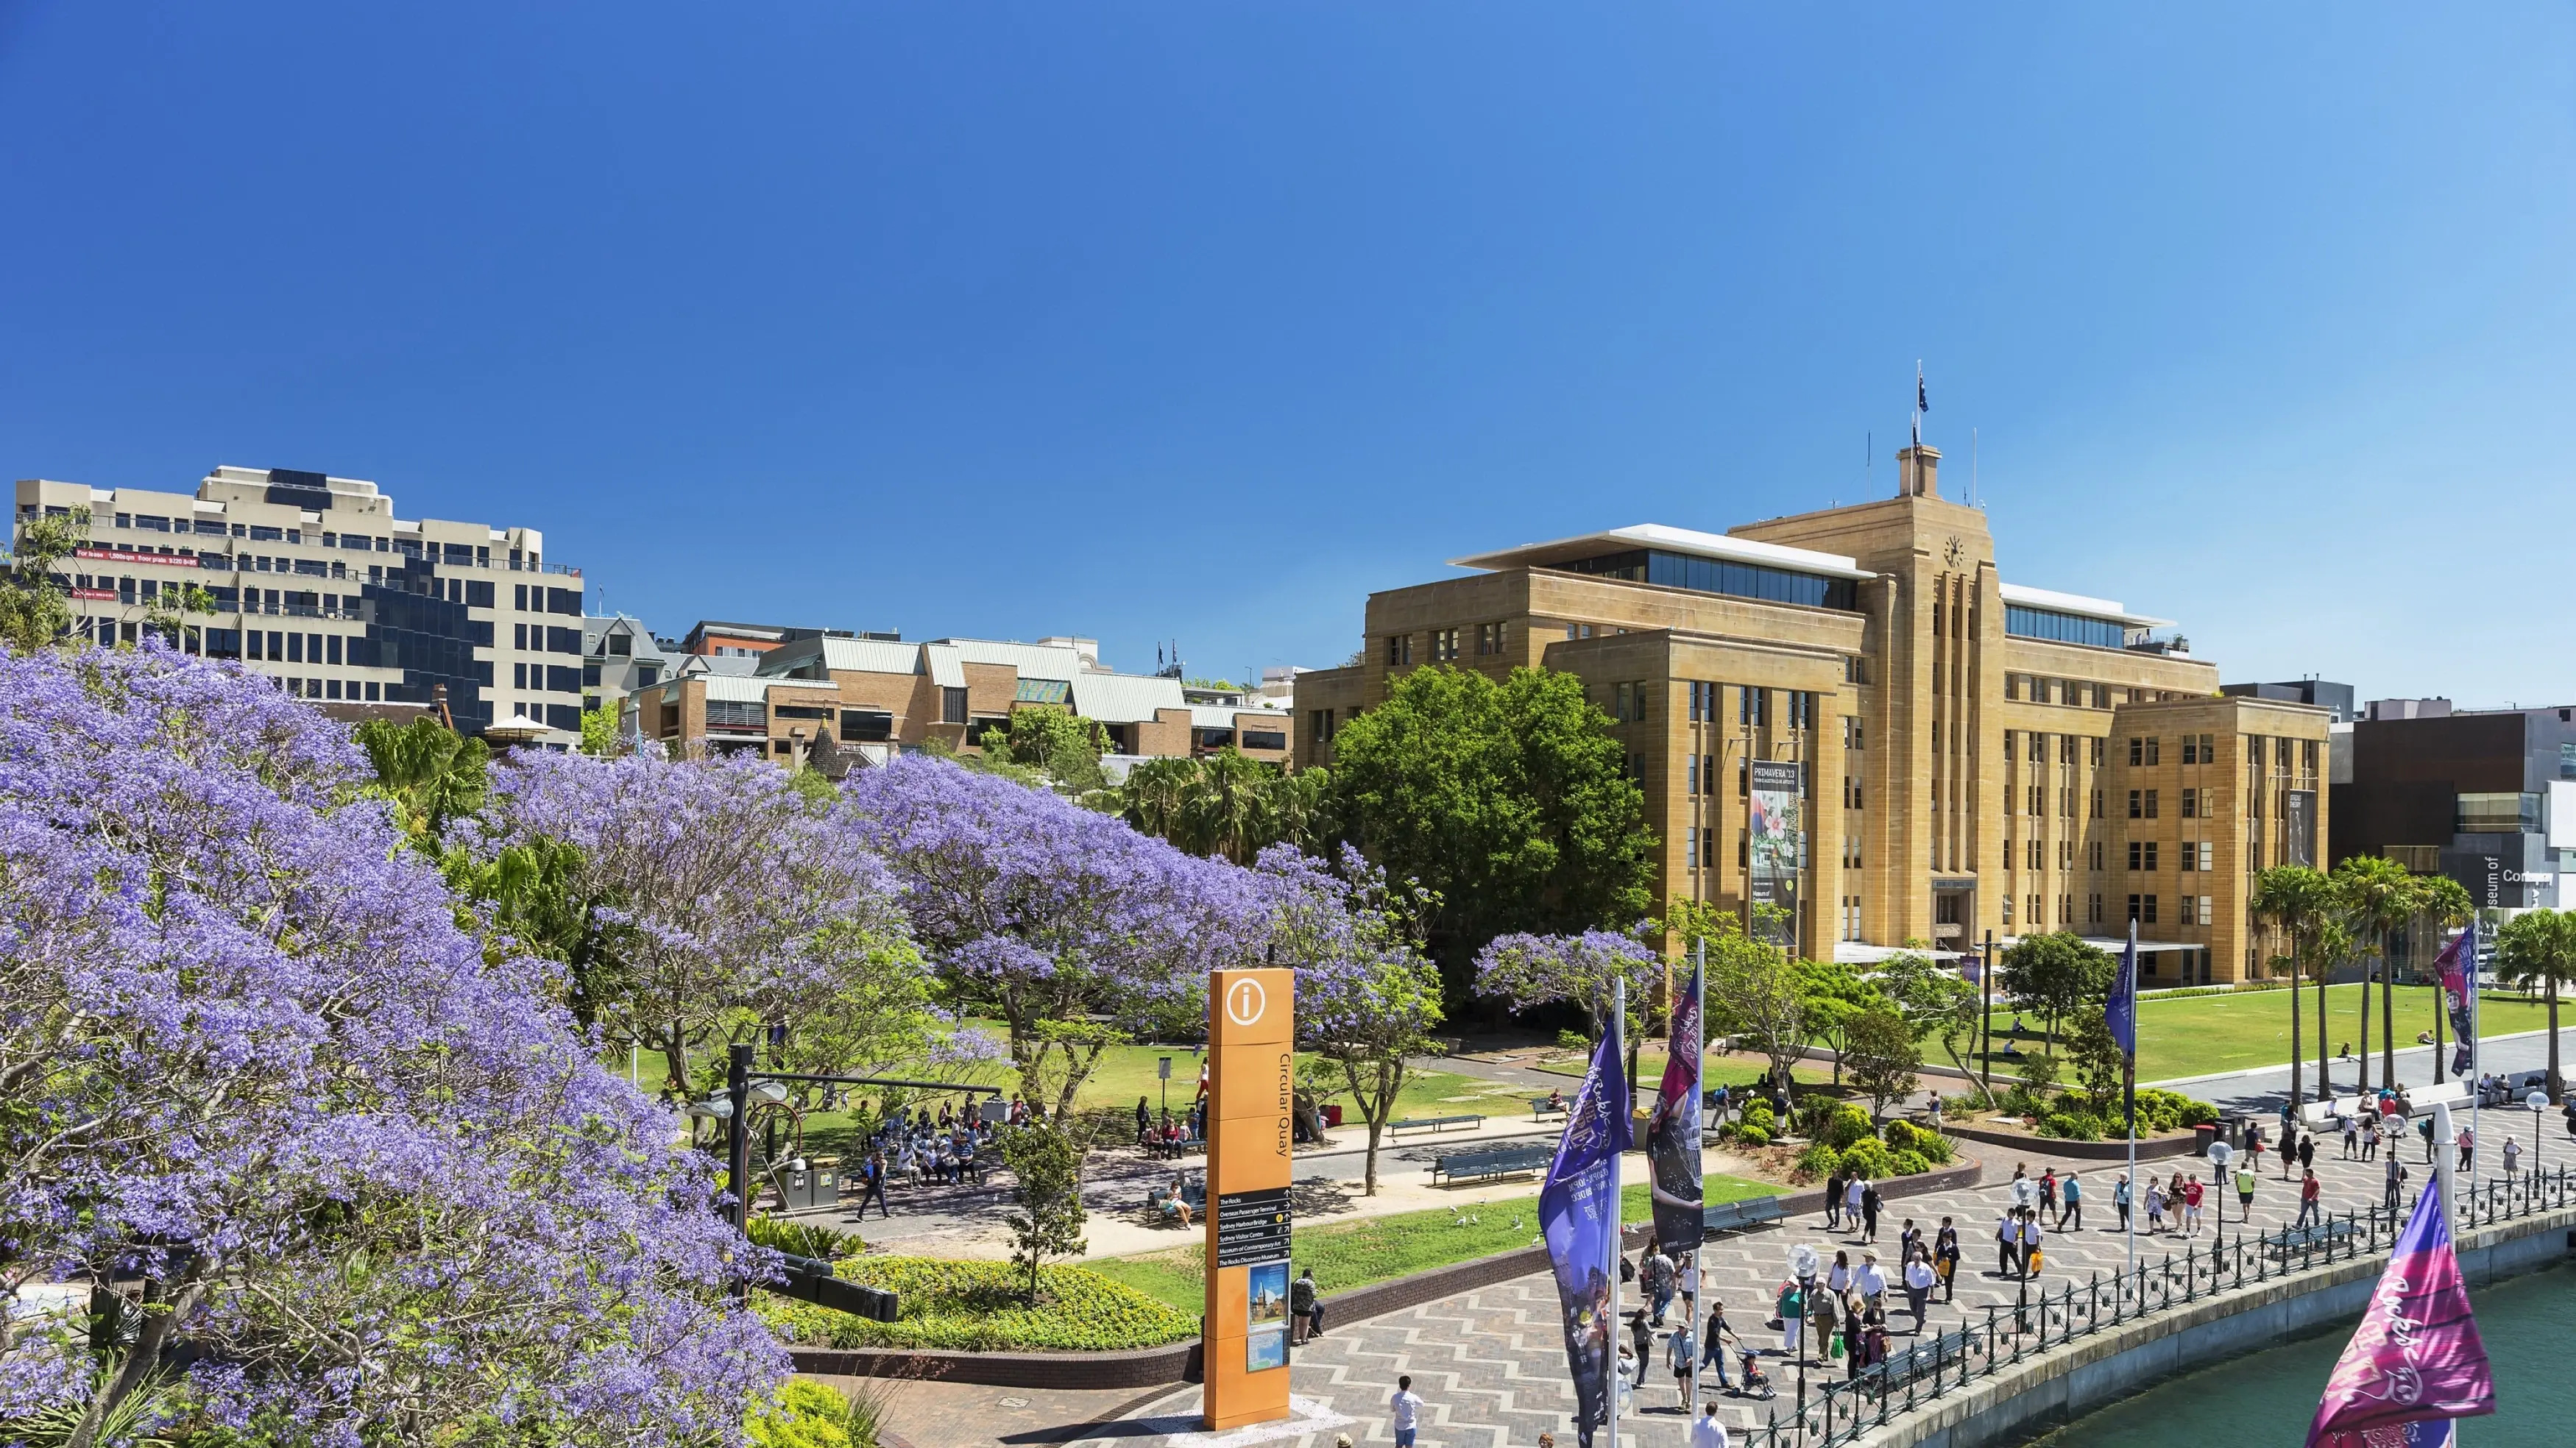 Circular Quay with wisteria trees in the foreground and MCA building in the background on a sunny day. Image credit: Destination NSW